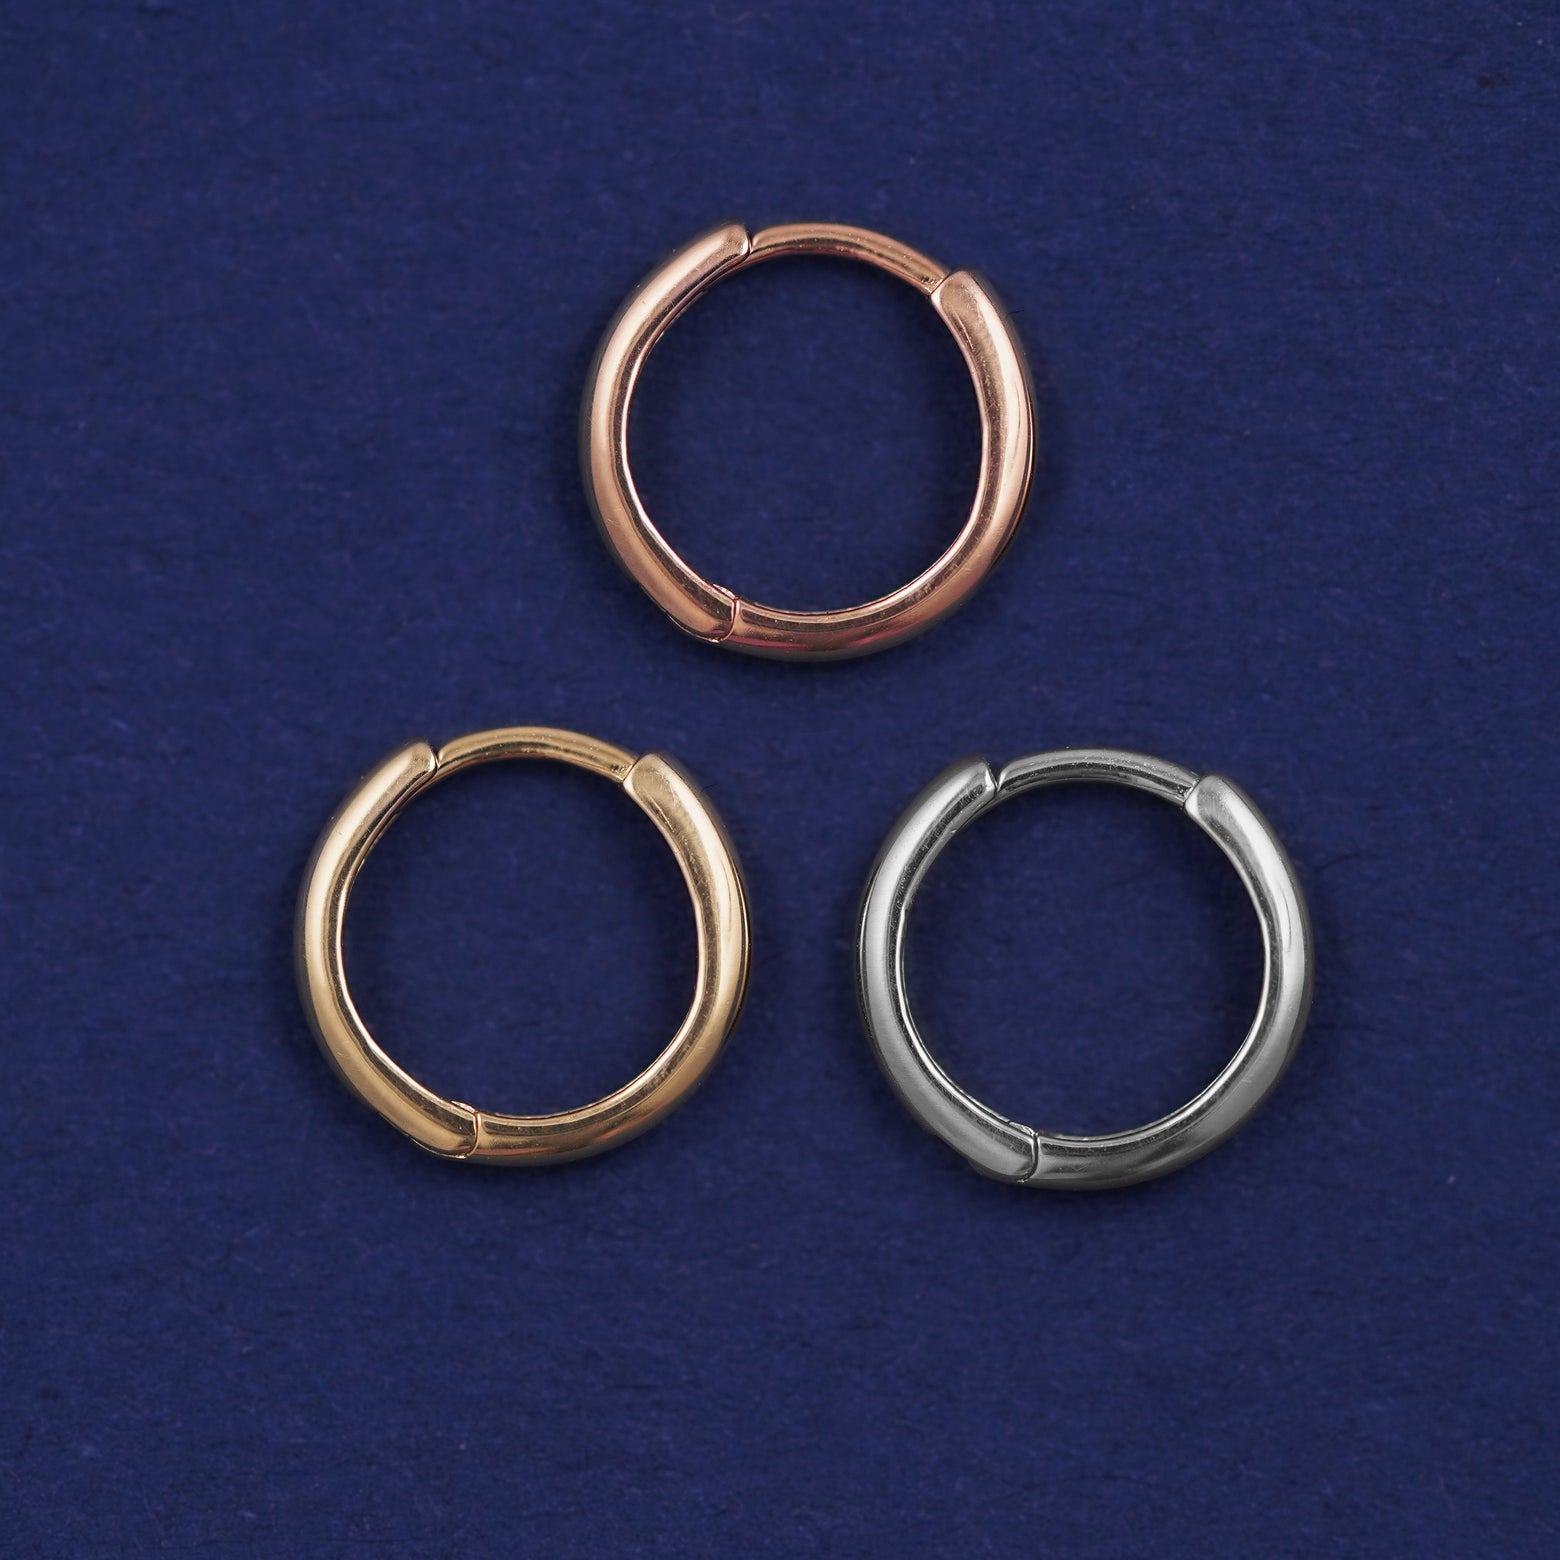 Three versions of the Small Curvy Huggie Hoop shown in options of rose, yellow, and white gold